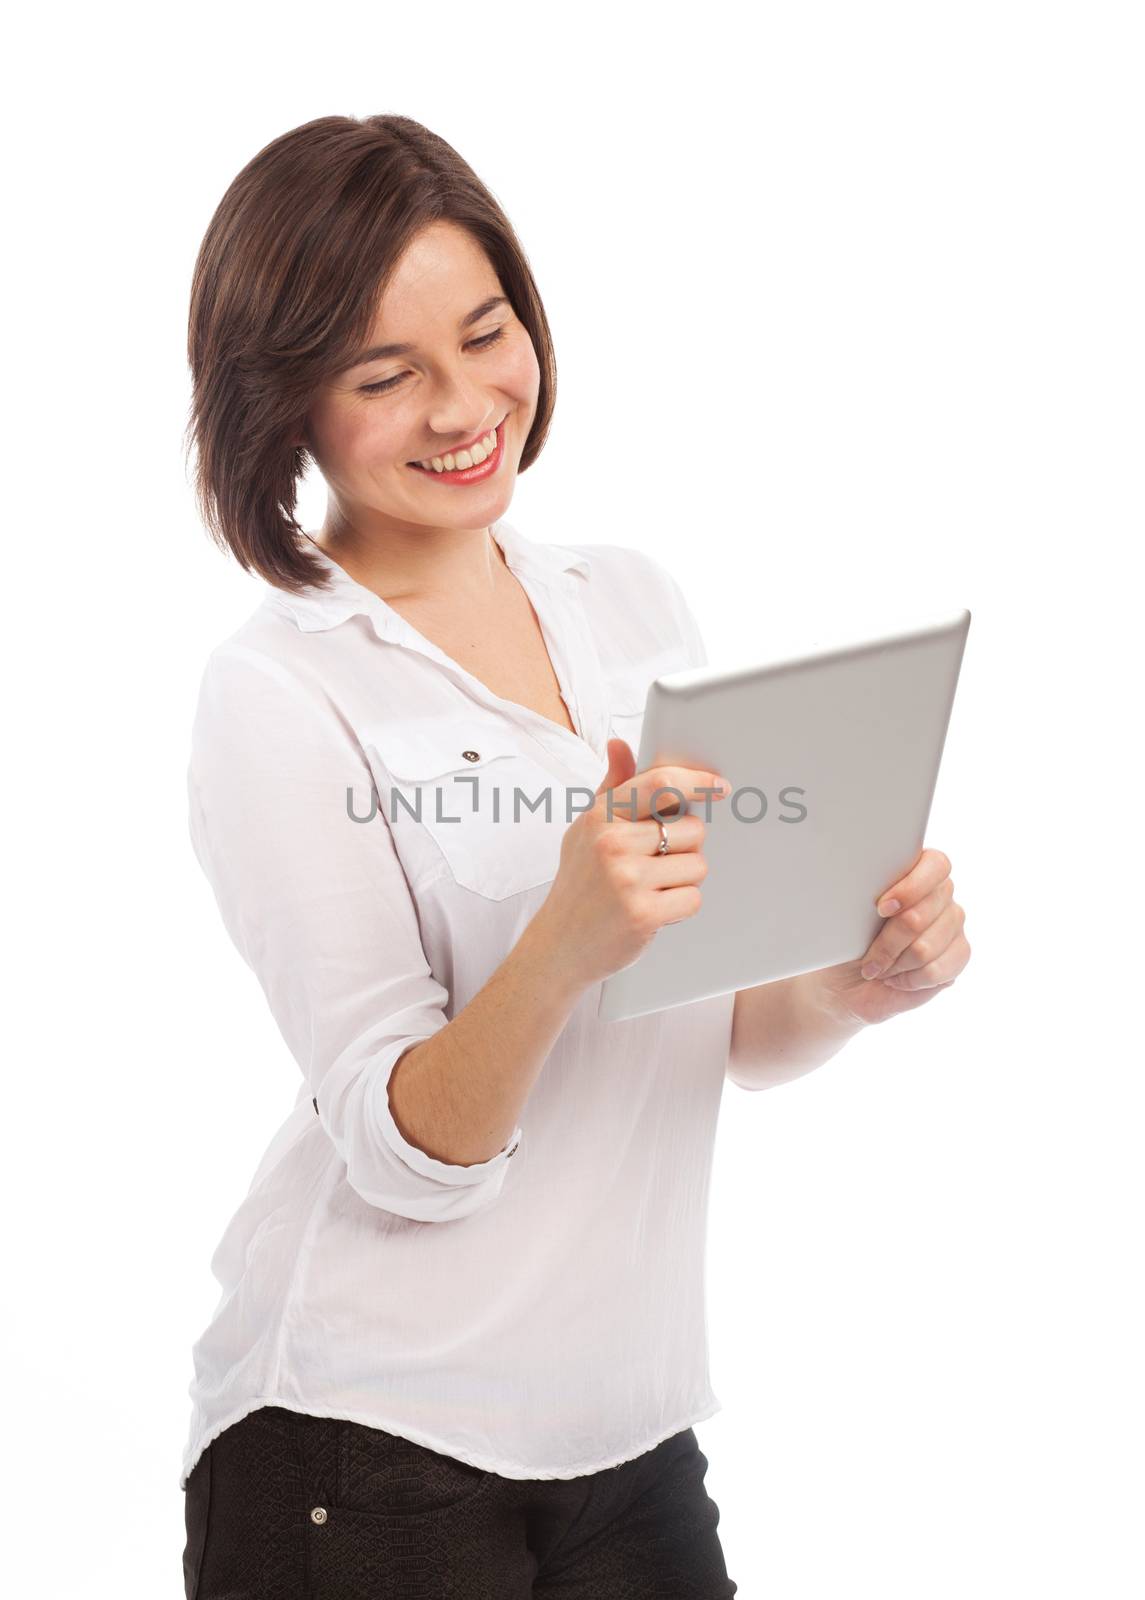 Young smiling brunette holding and reading something on a touchpad, isolated on white